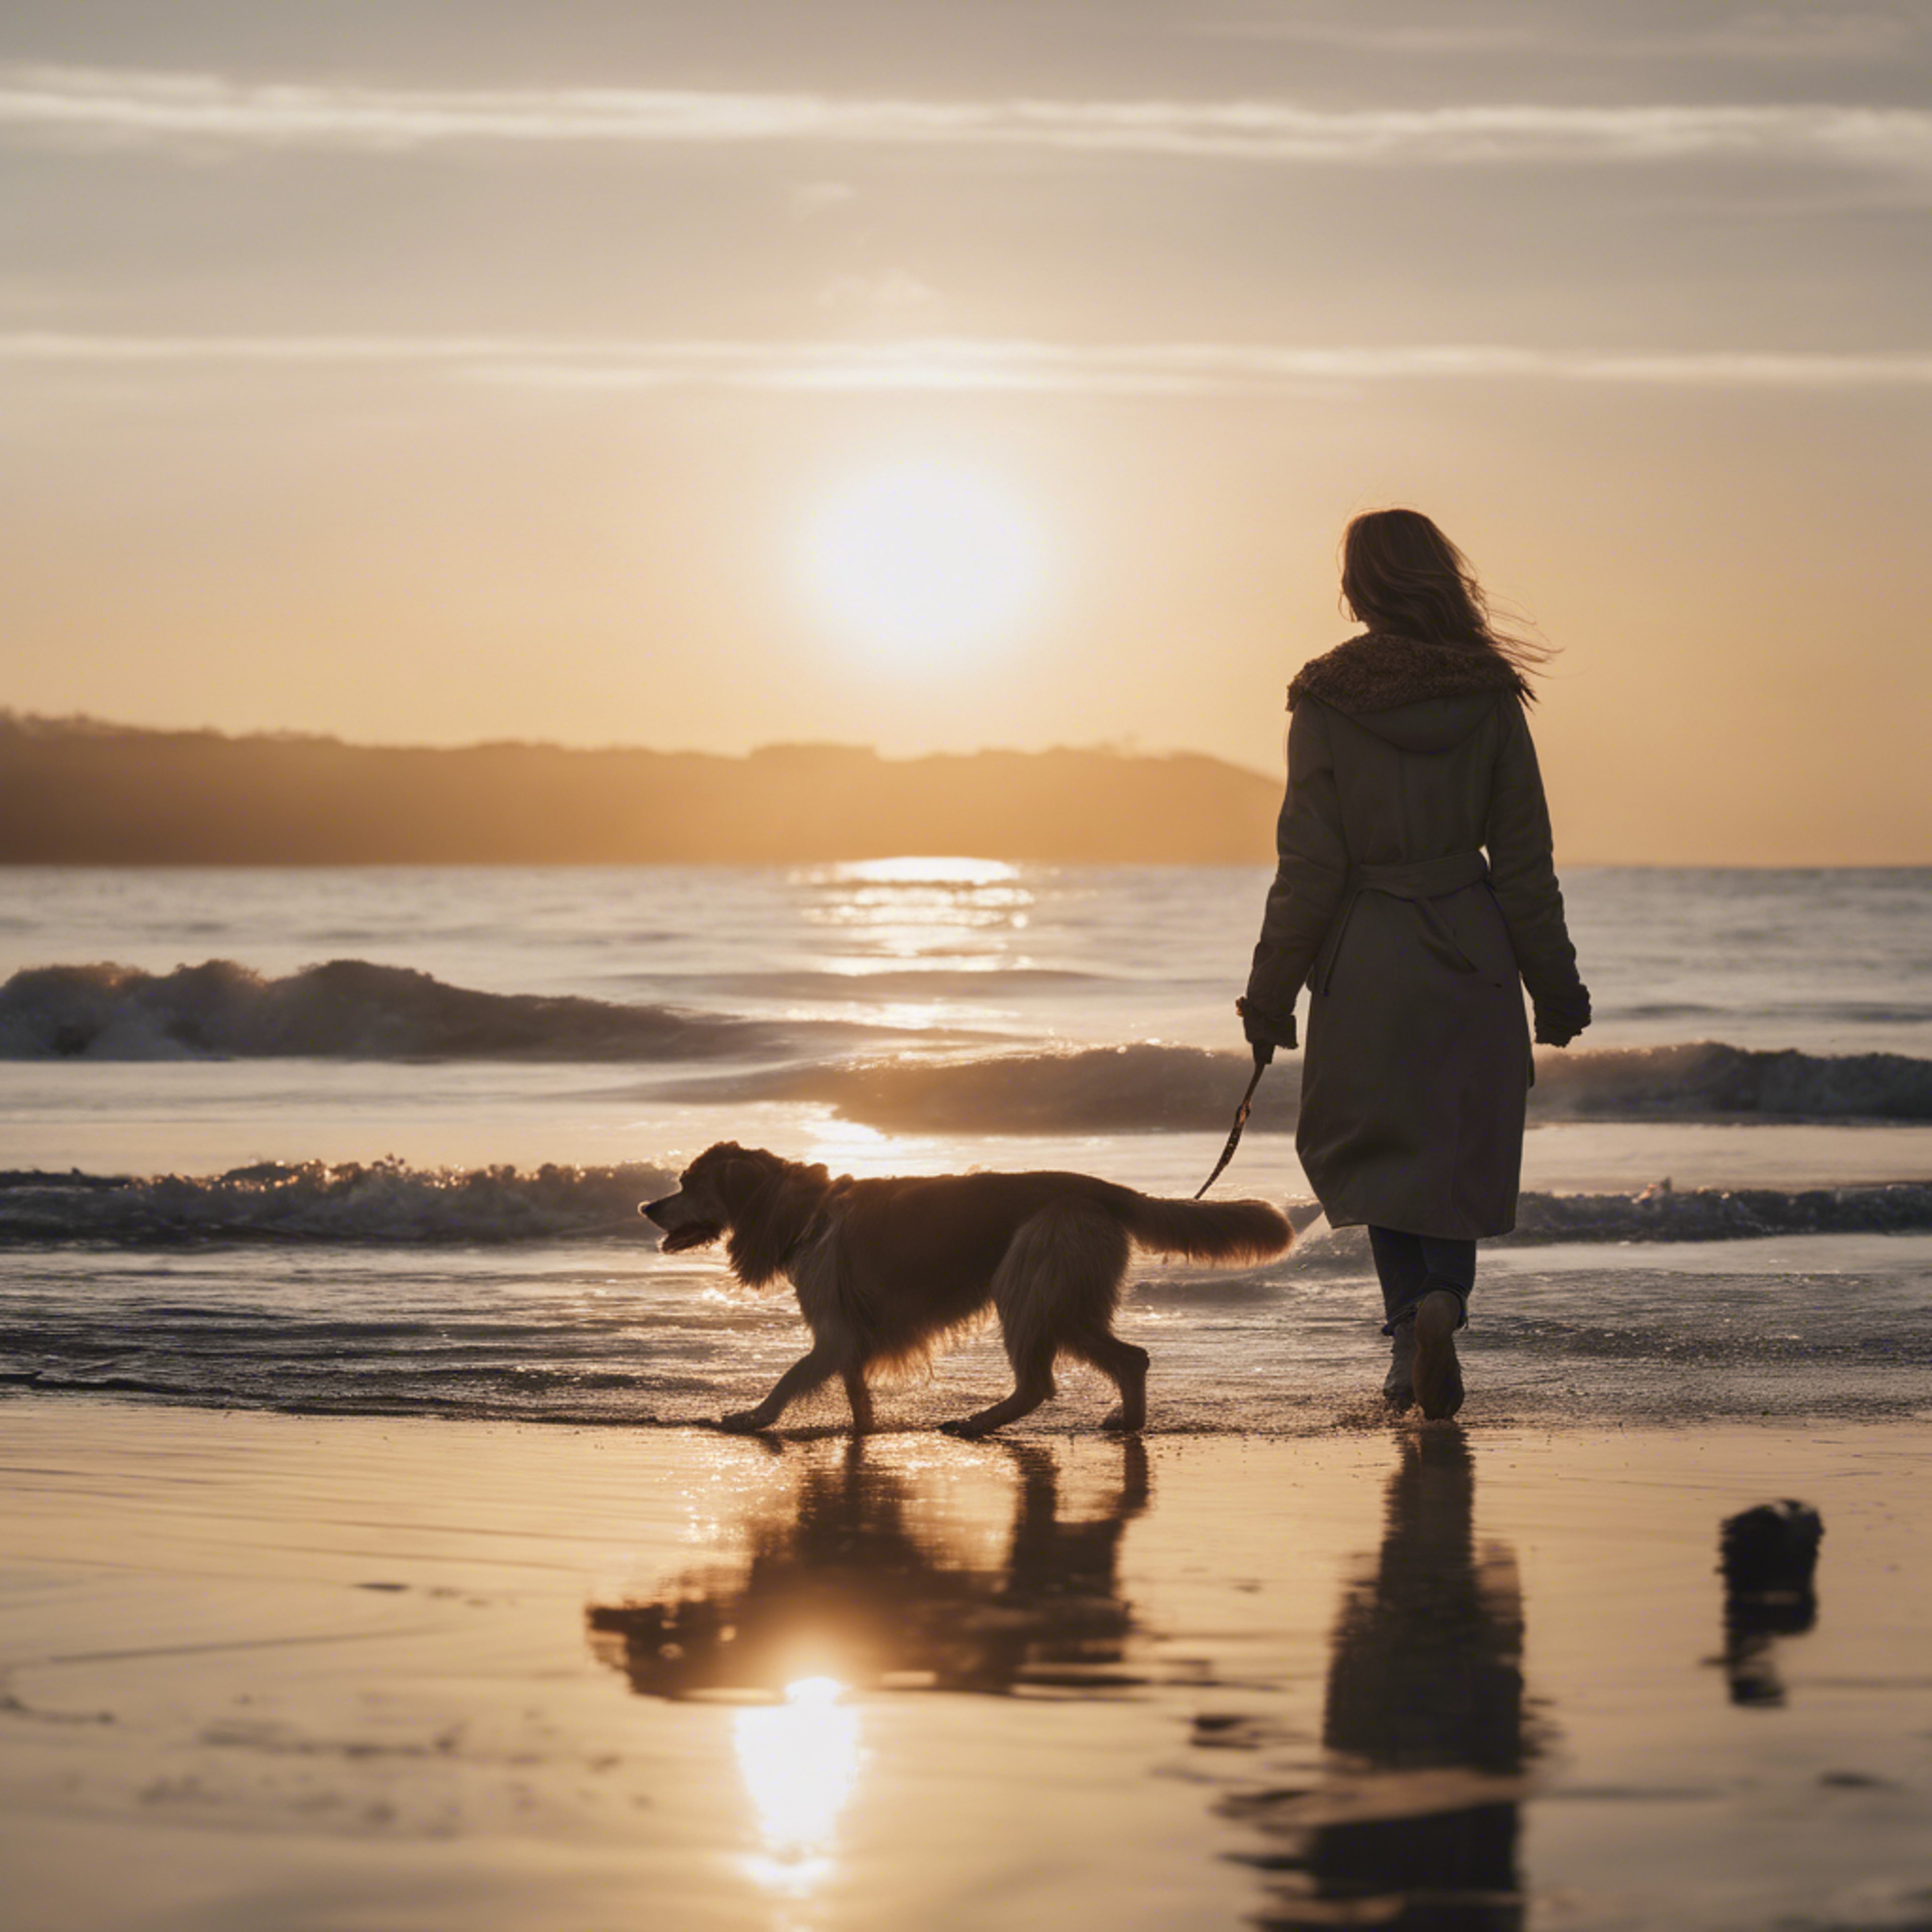 A beach scene with a woman walking her enthusiastic dog along the water's edge at sunset. Tapeta[f9bc2ab3990f4caba062]